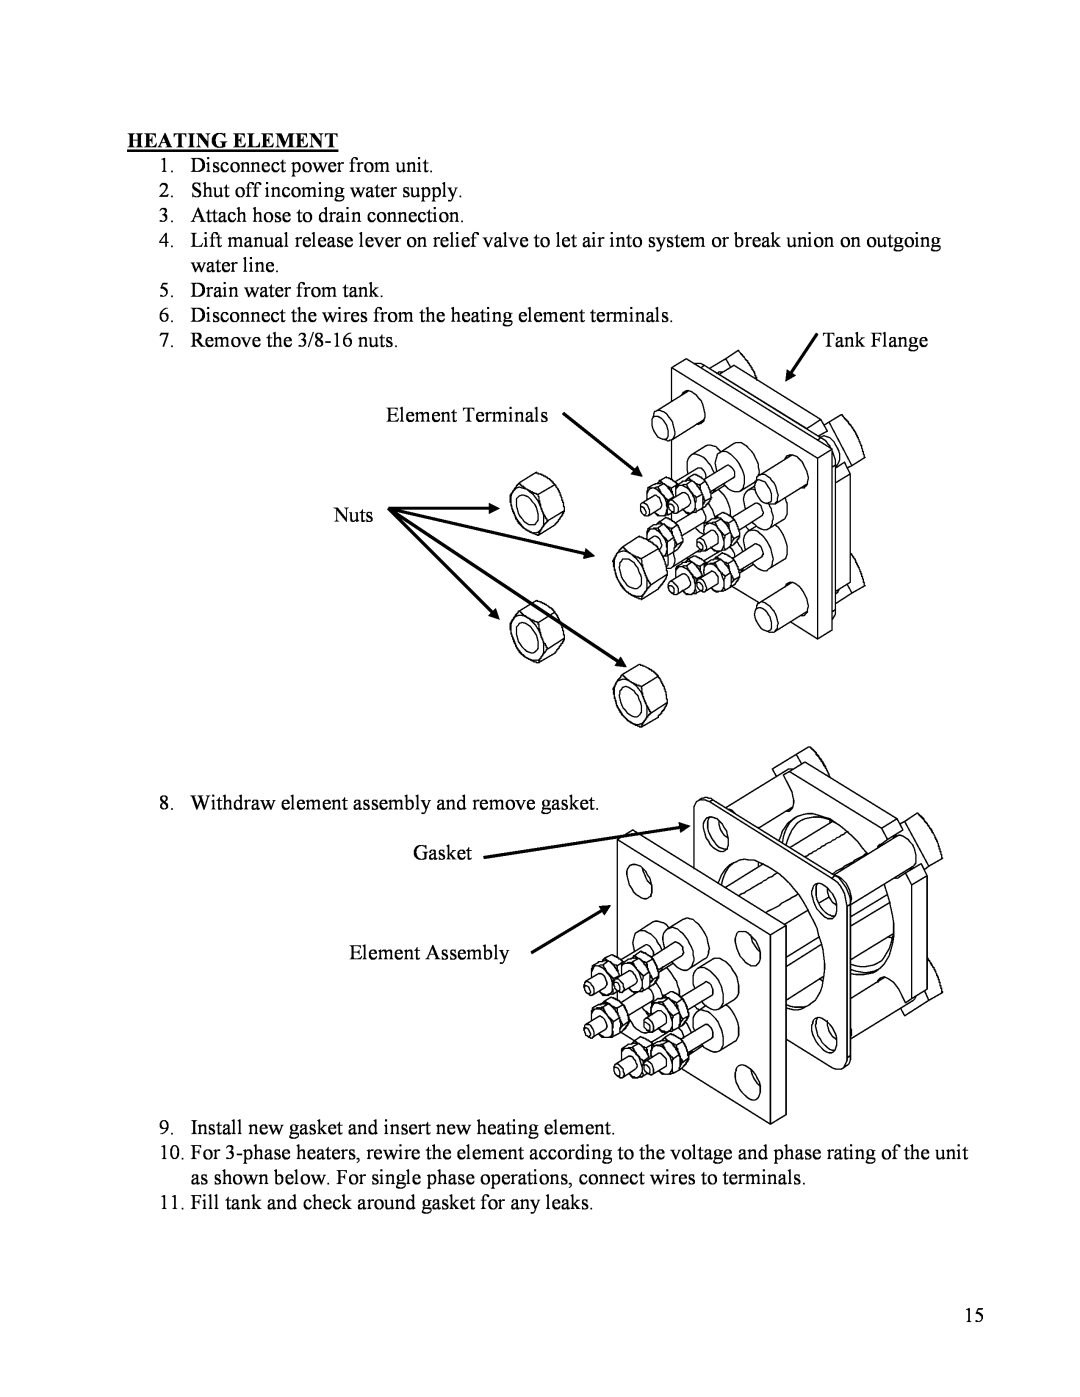 Hubbell Electric Heater Company HE, HSE manual Heating Element, Disconnect power from unit 